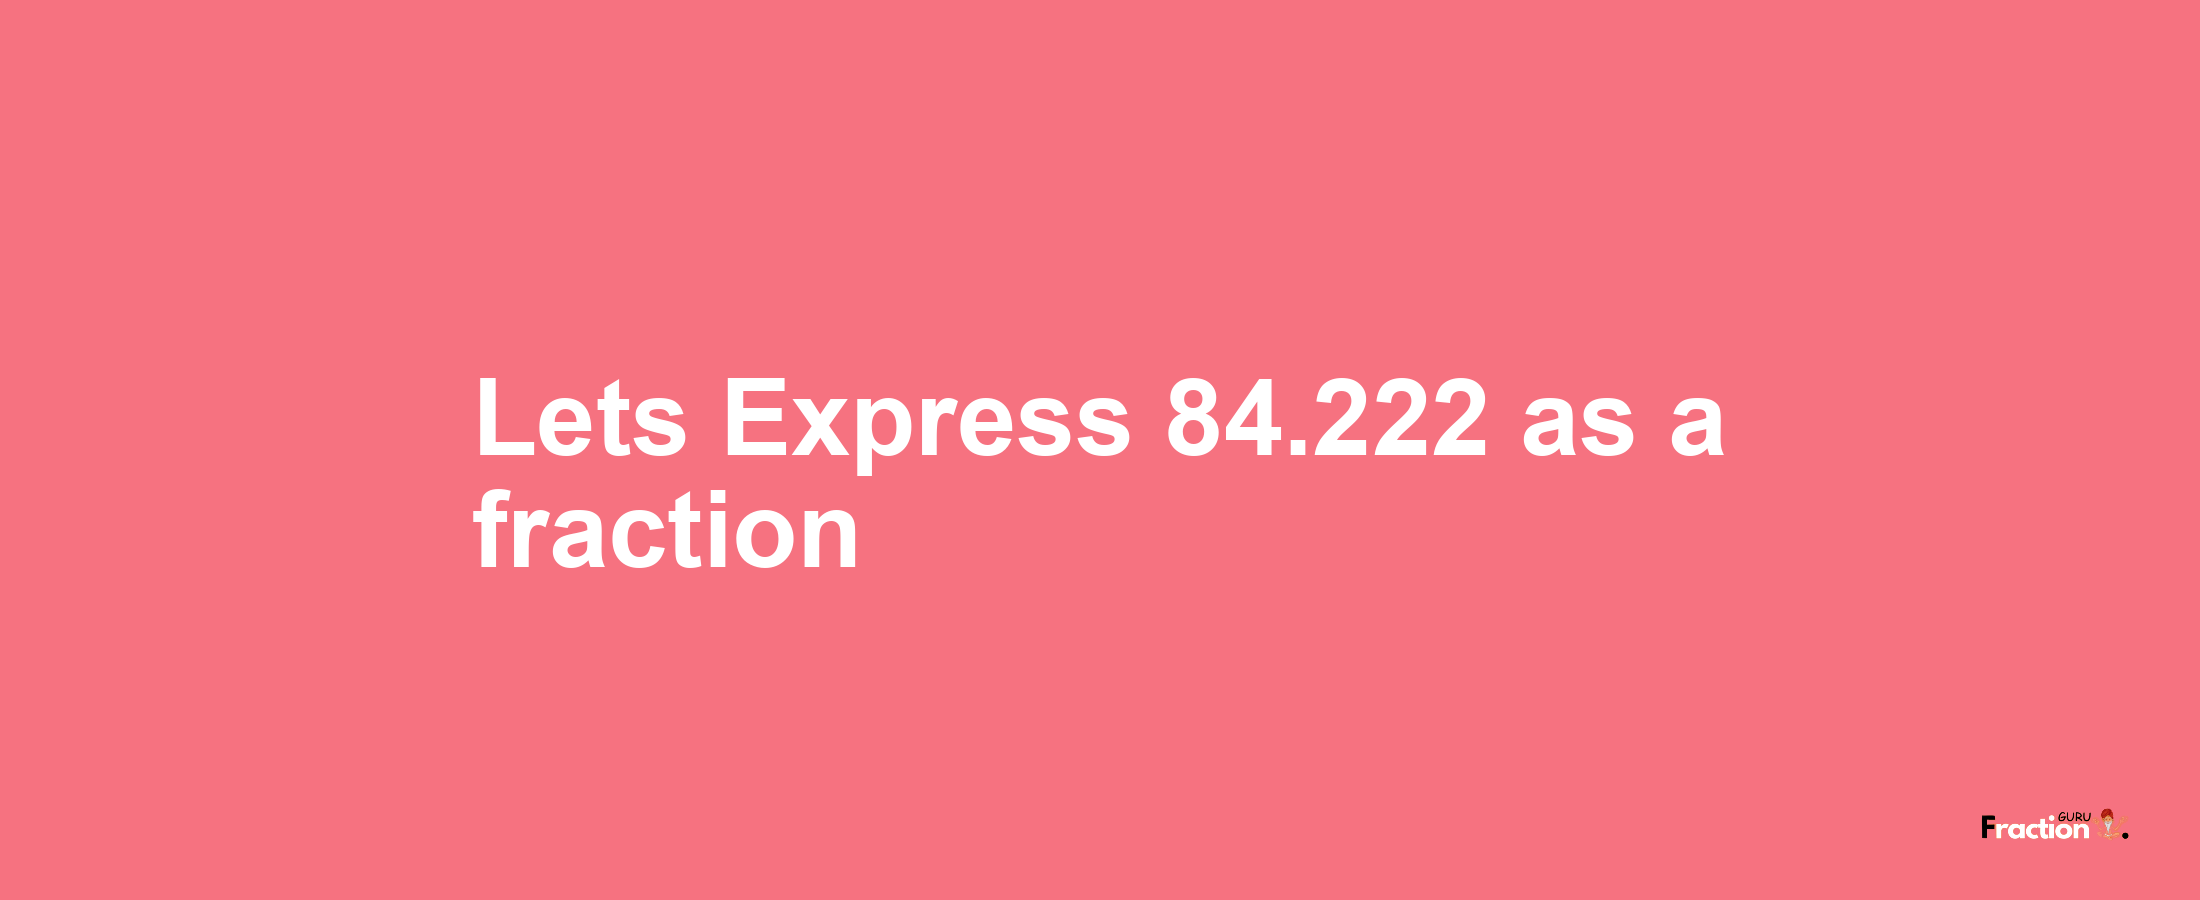 Lets Express 84.222 as afraction